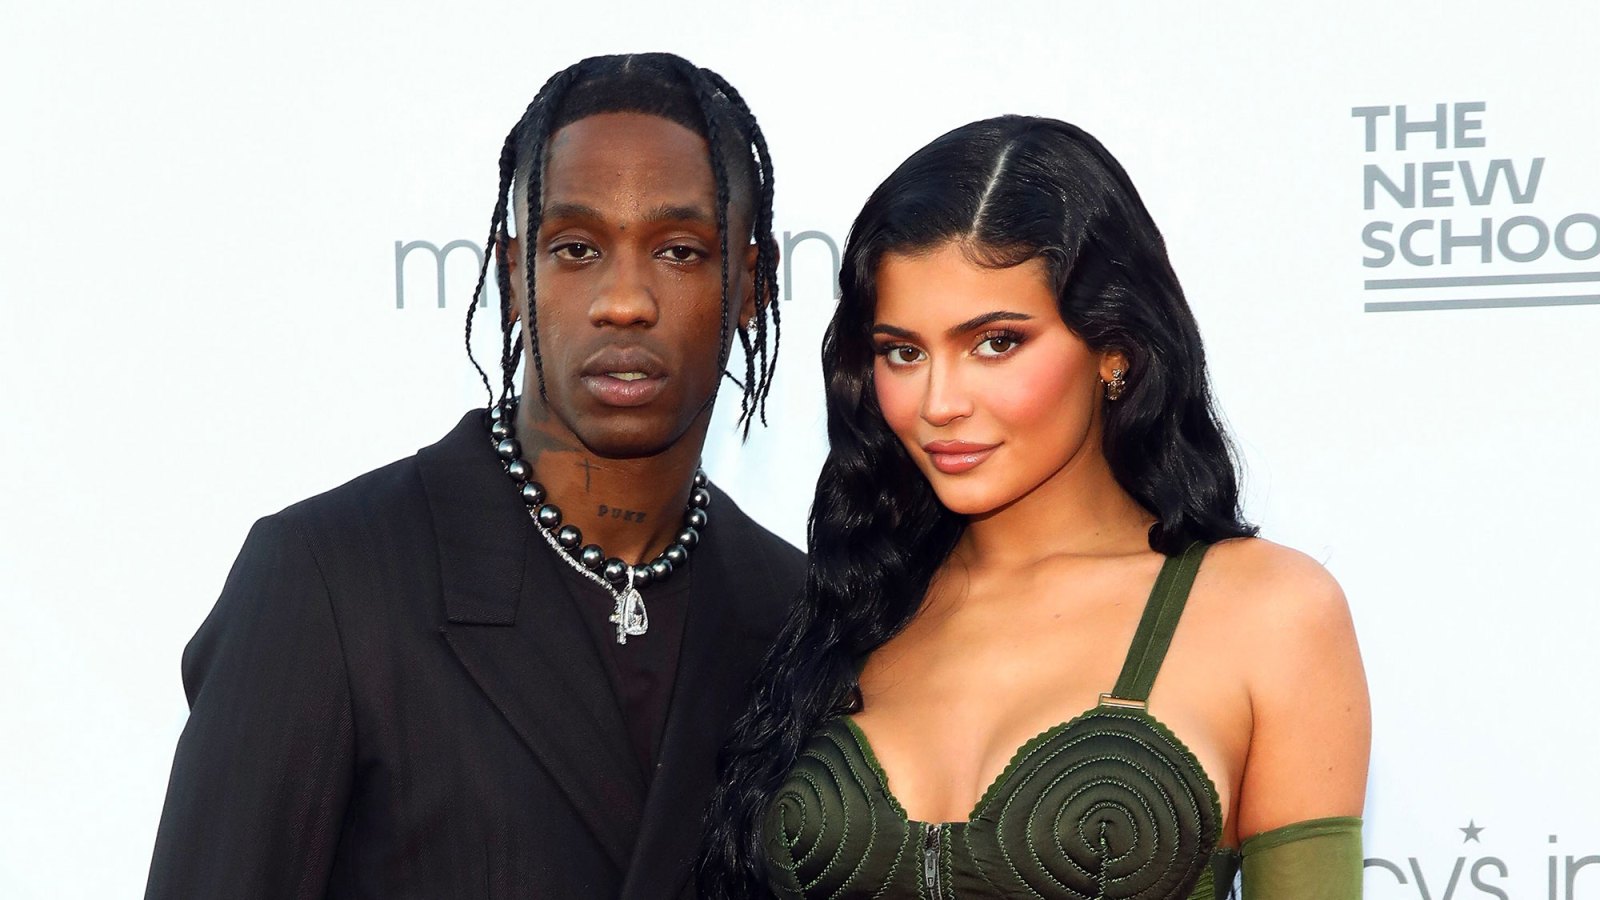 Kylie Jenner and Travis Scott Snuggle Up Close in New TikTok to His Song 'MAFIA